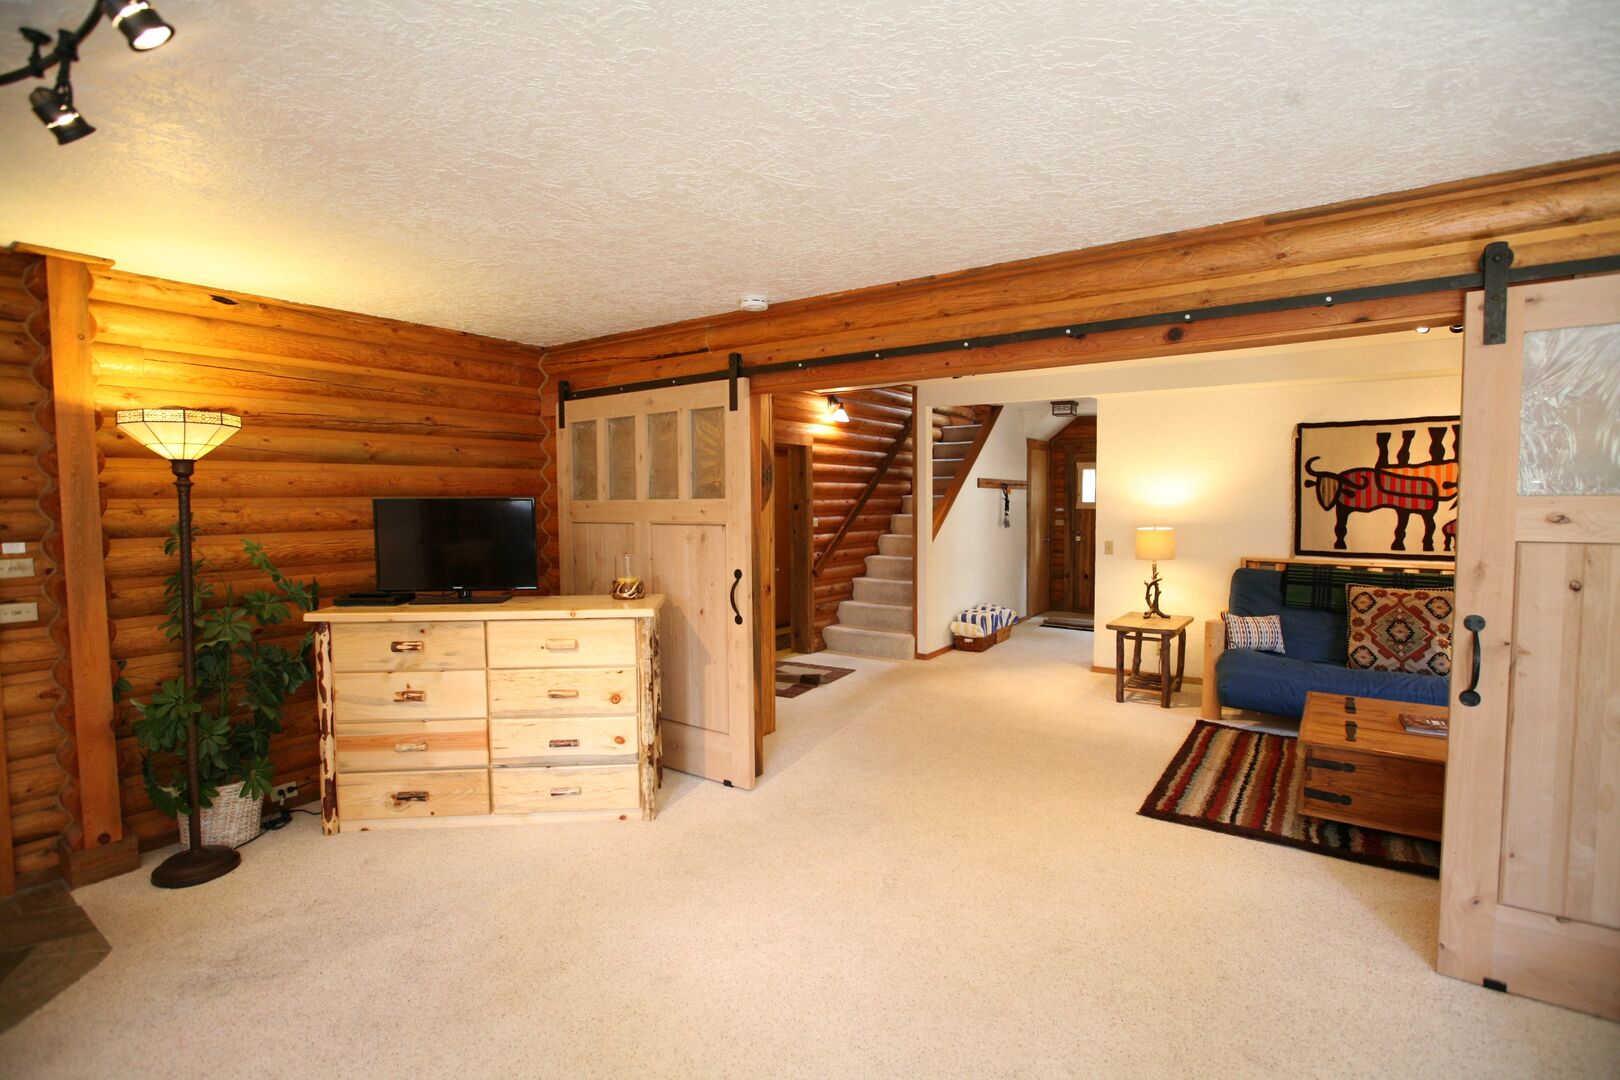 King Master - Downstairs - Spacious with barn doors and exterior access.